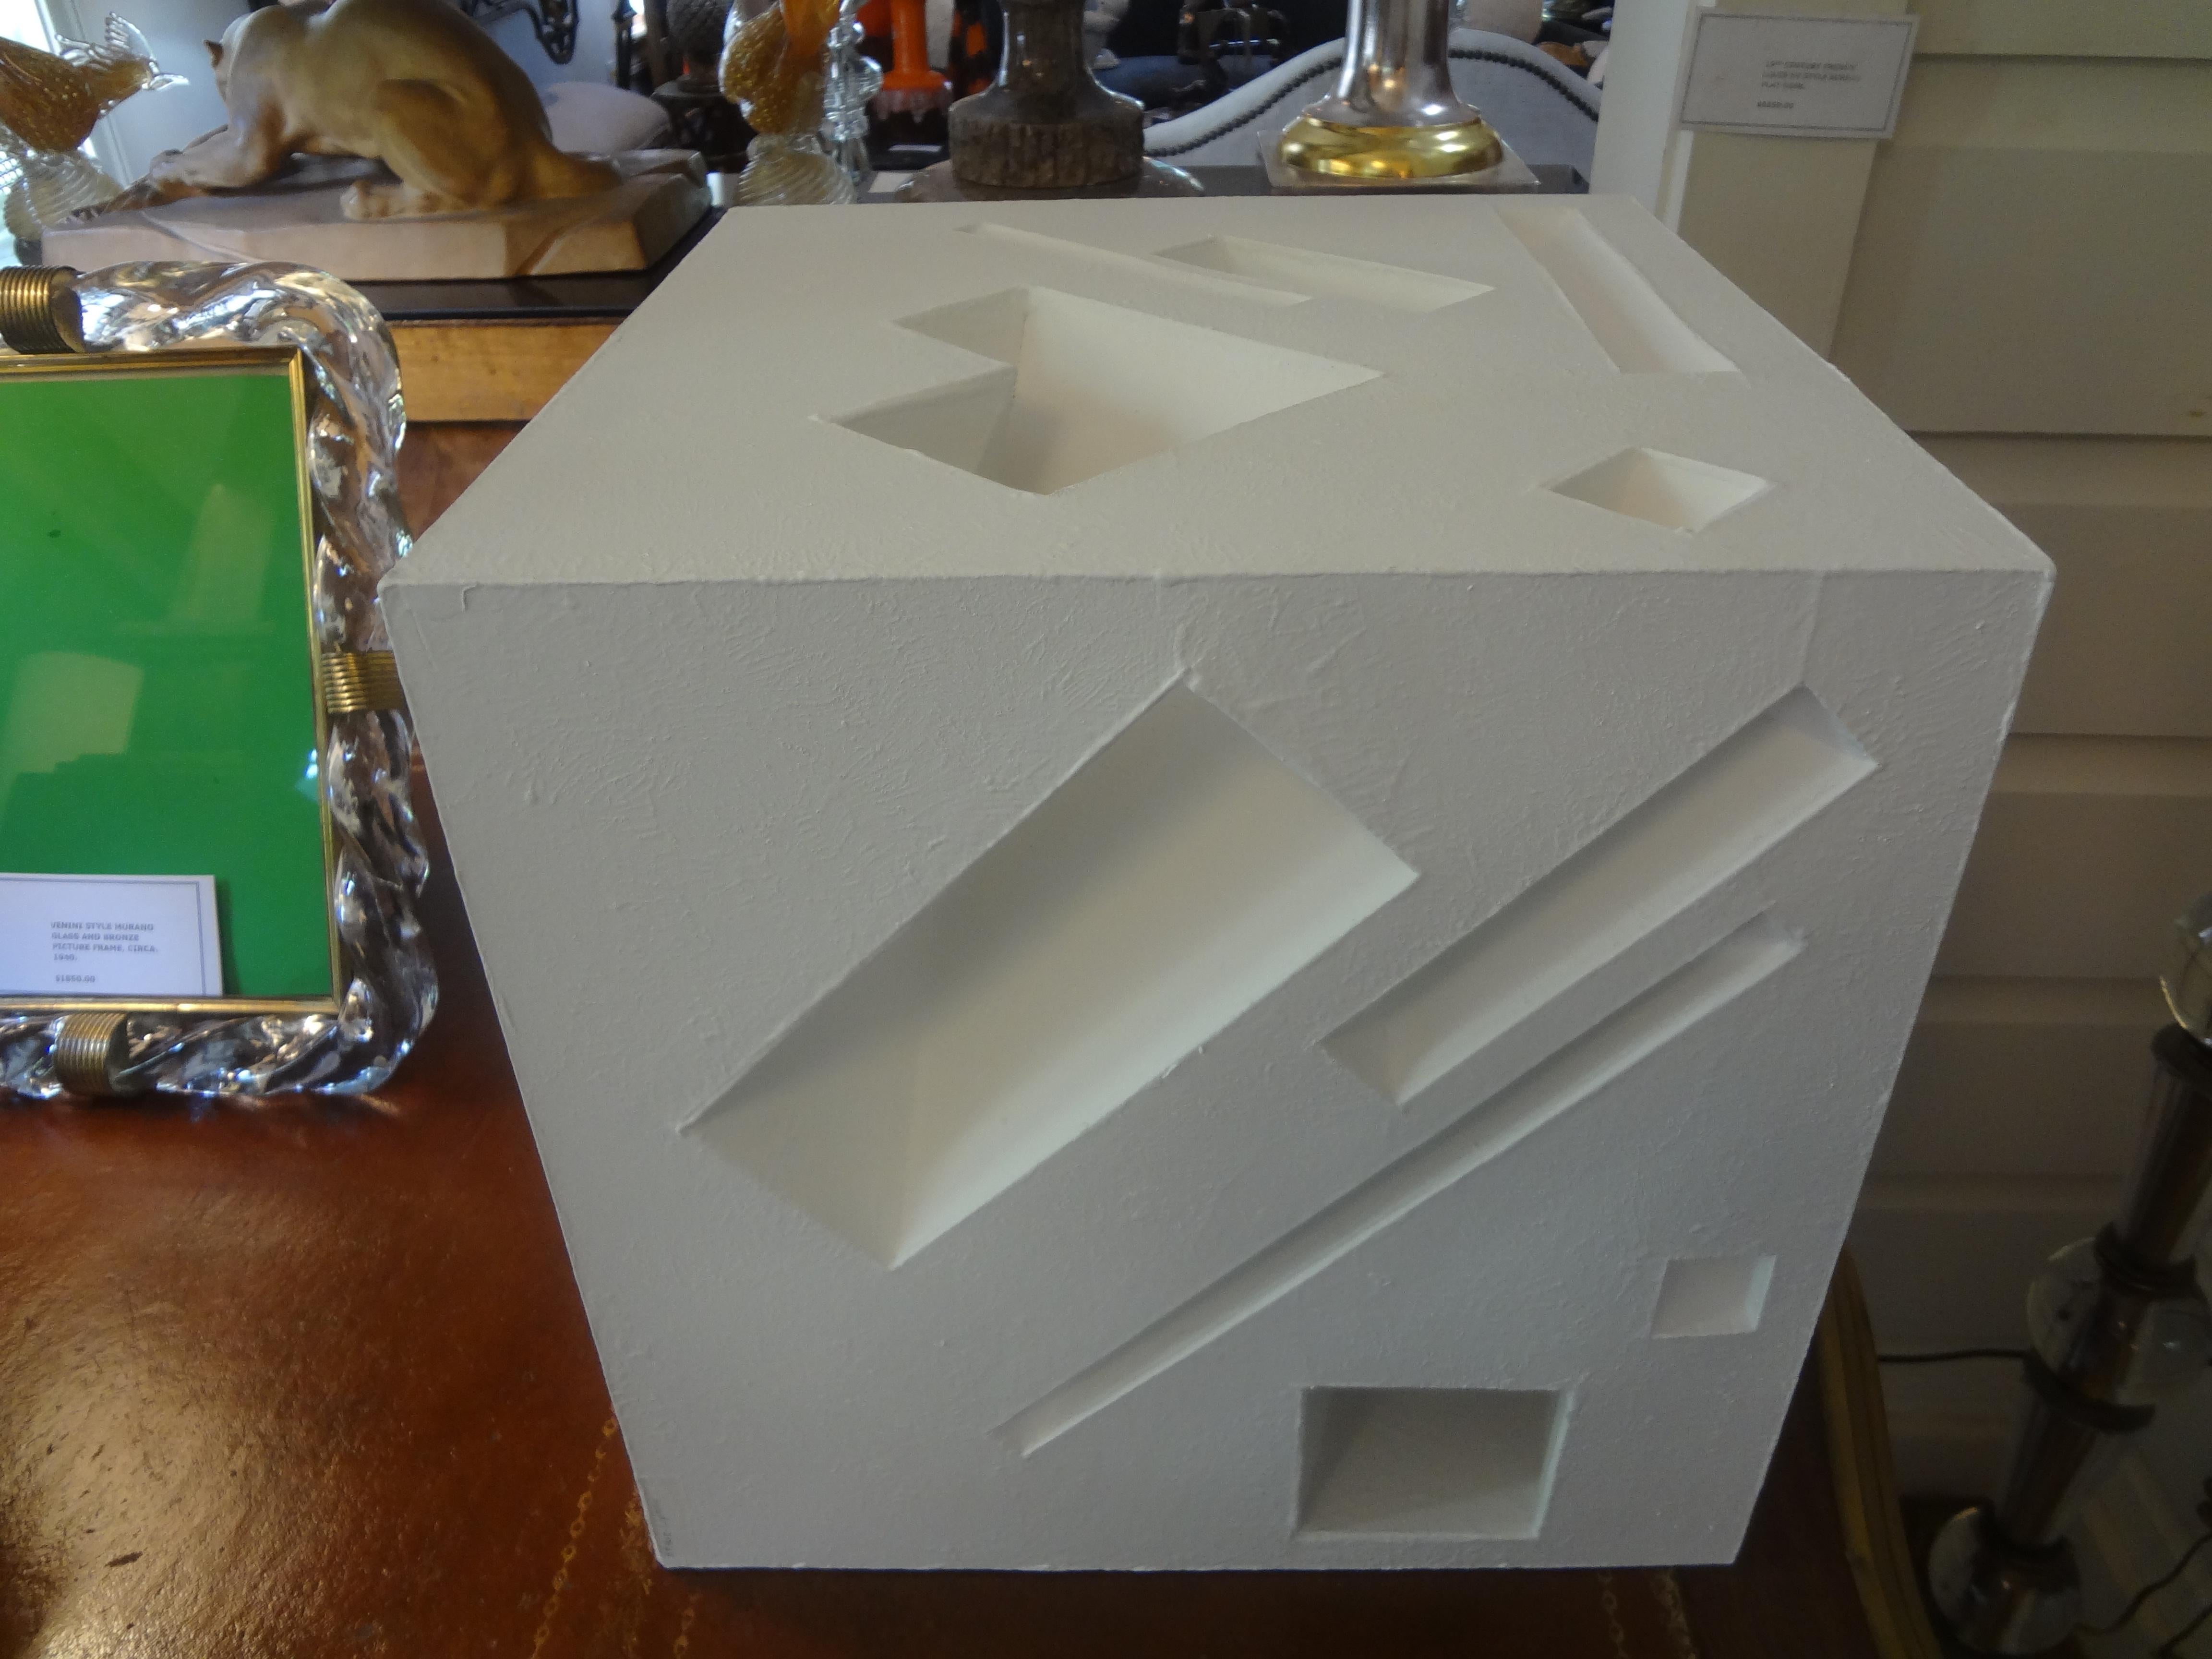 Paper Mid-Century Modern Abstract Cube Sculpture Signed Steve Upham For Sale